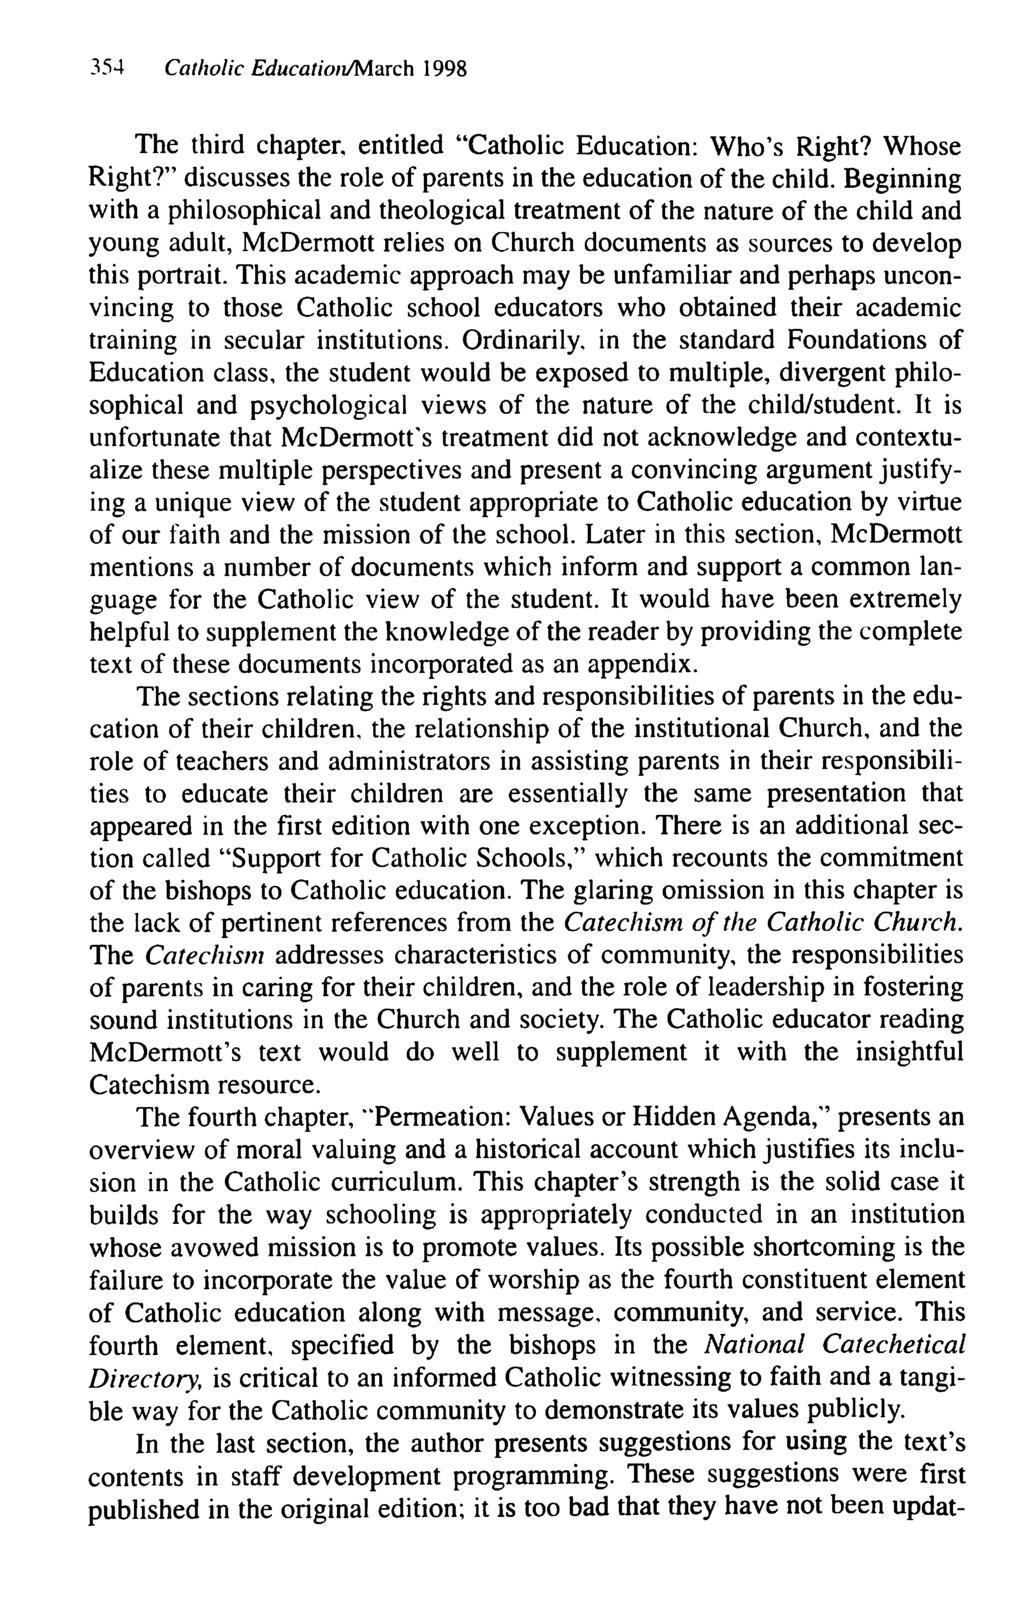 354 Catholic Education/March 1998 The third chapter, entitled "Catholic Education: Who's Right? Whose Right?" discusses the role of parents in the education of the child.